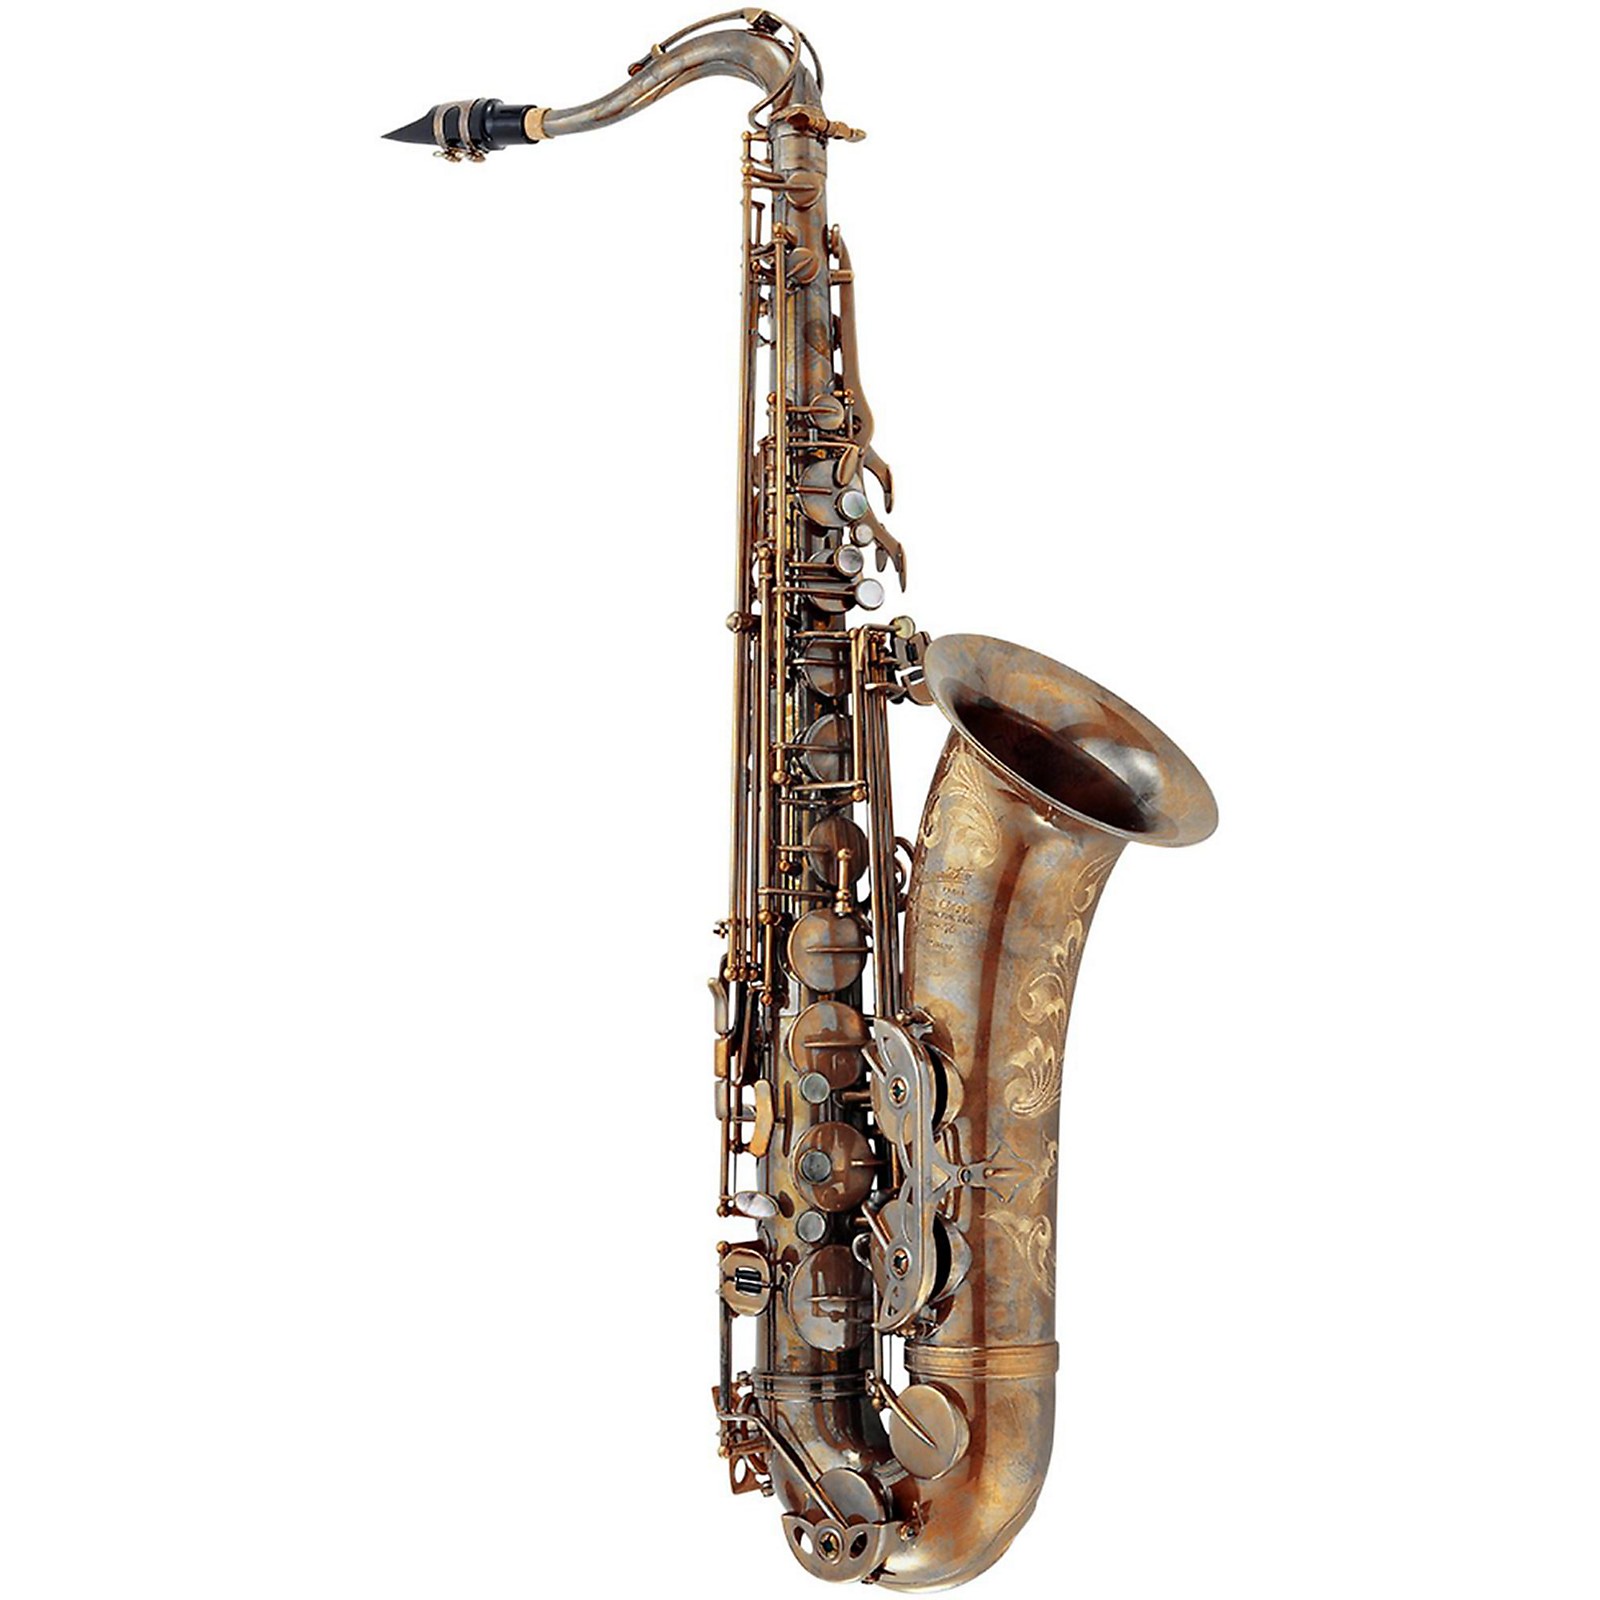 https://media.musicarts.com/is/image/MMGS7/System-76-Professional-Tenor-Saxophone-Un-Lacquered-with-O-F/H72355000004000-00-1600x1600.jpg